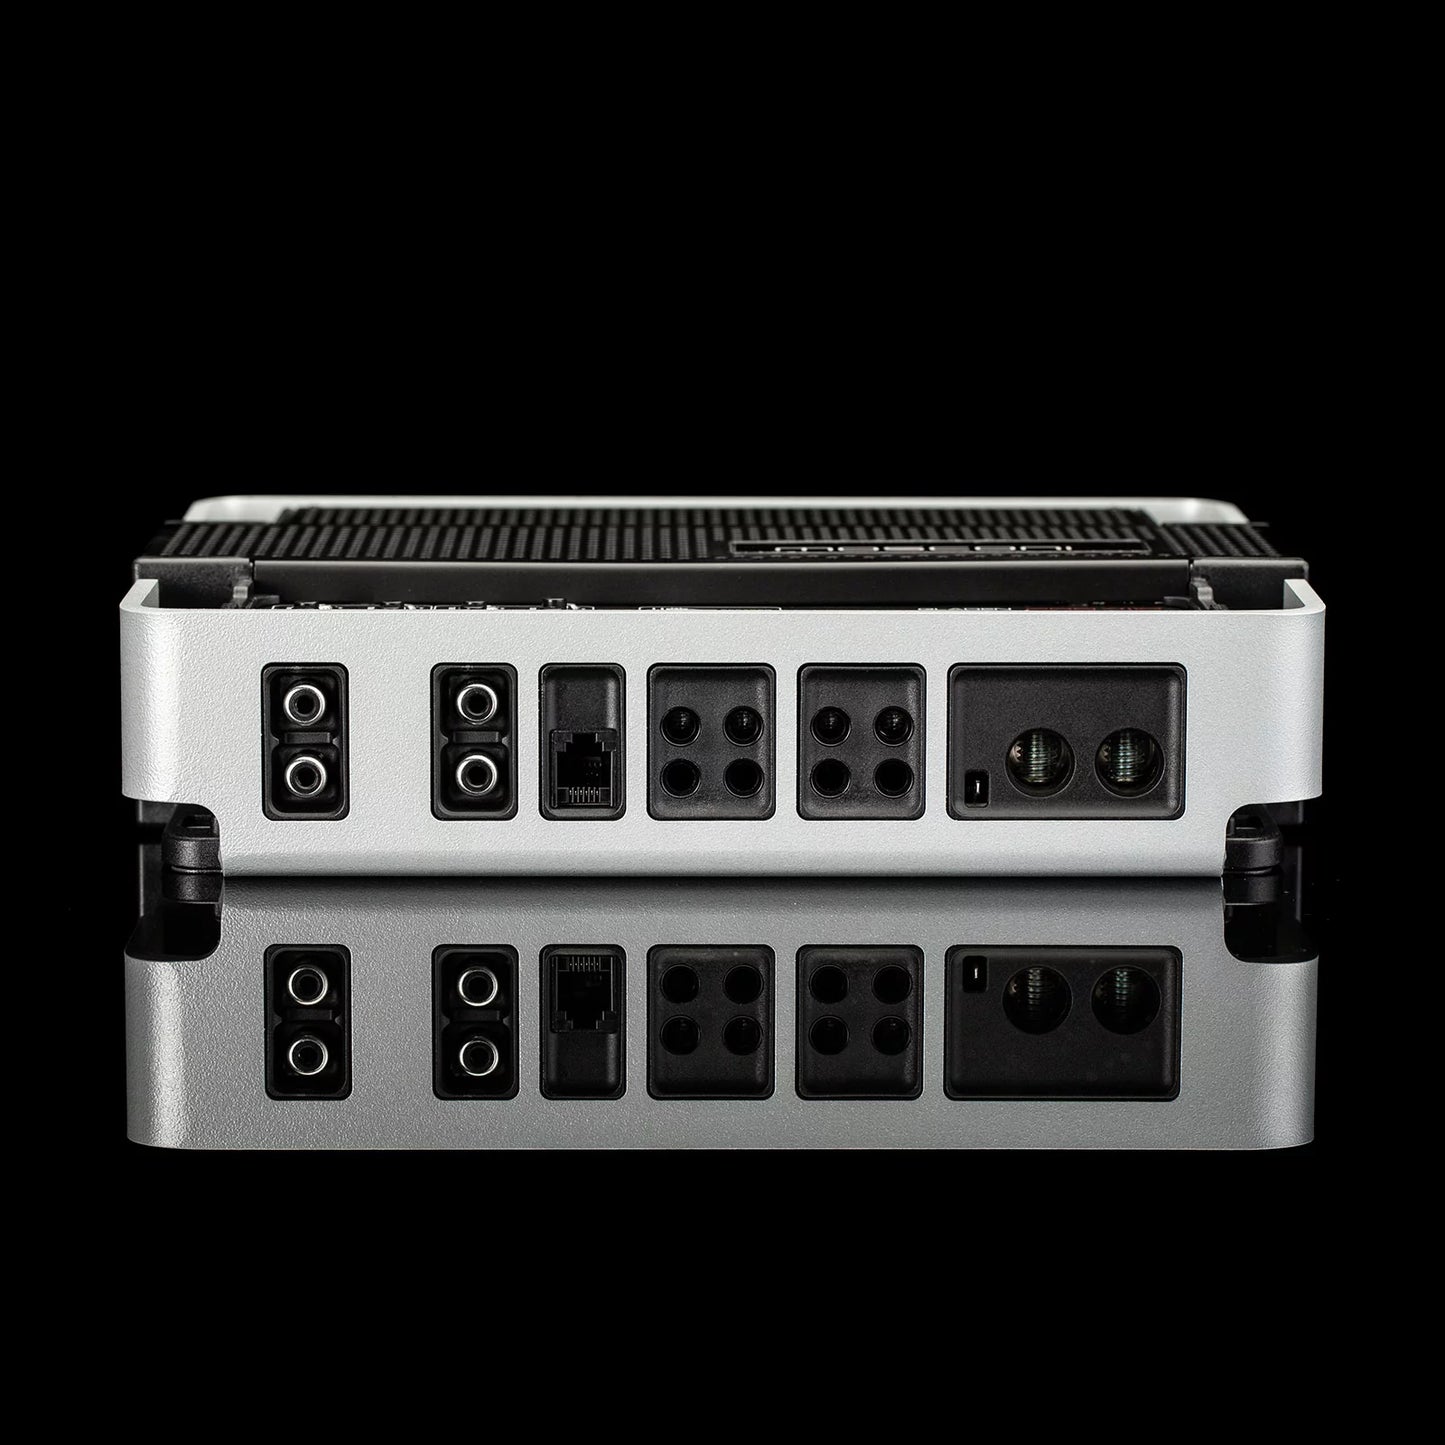 MOSCONI PRO 4|10 CLASS-AB 4-CHANNEL AMPLIFIER